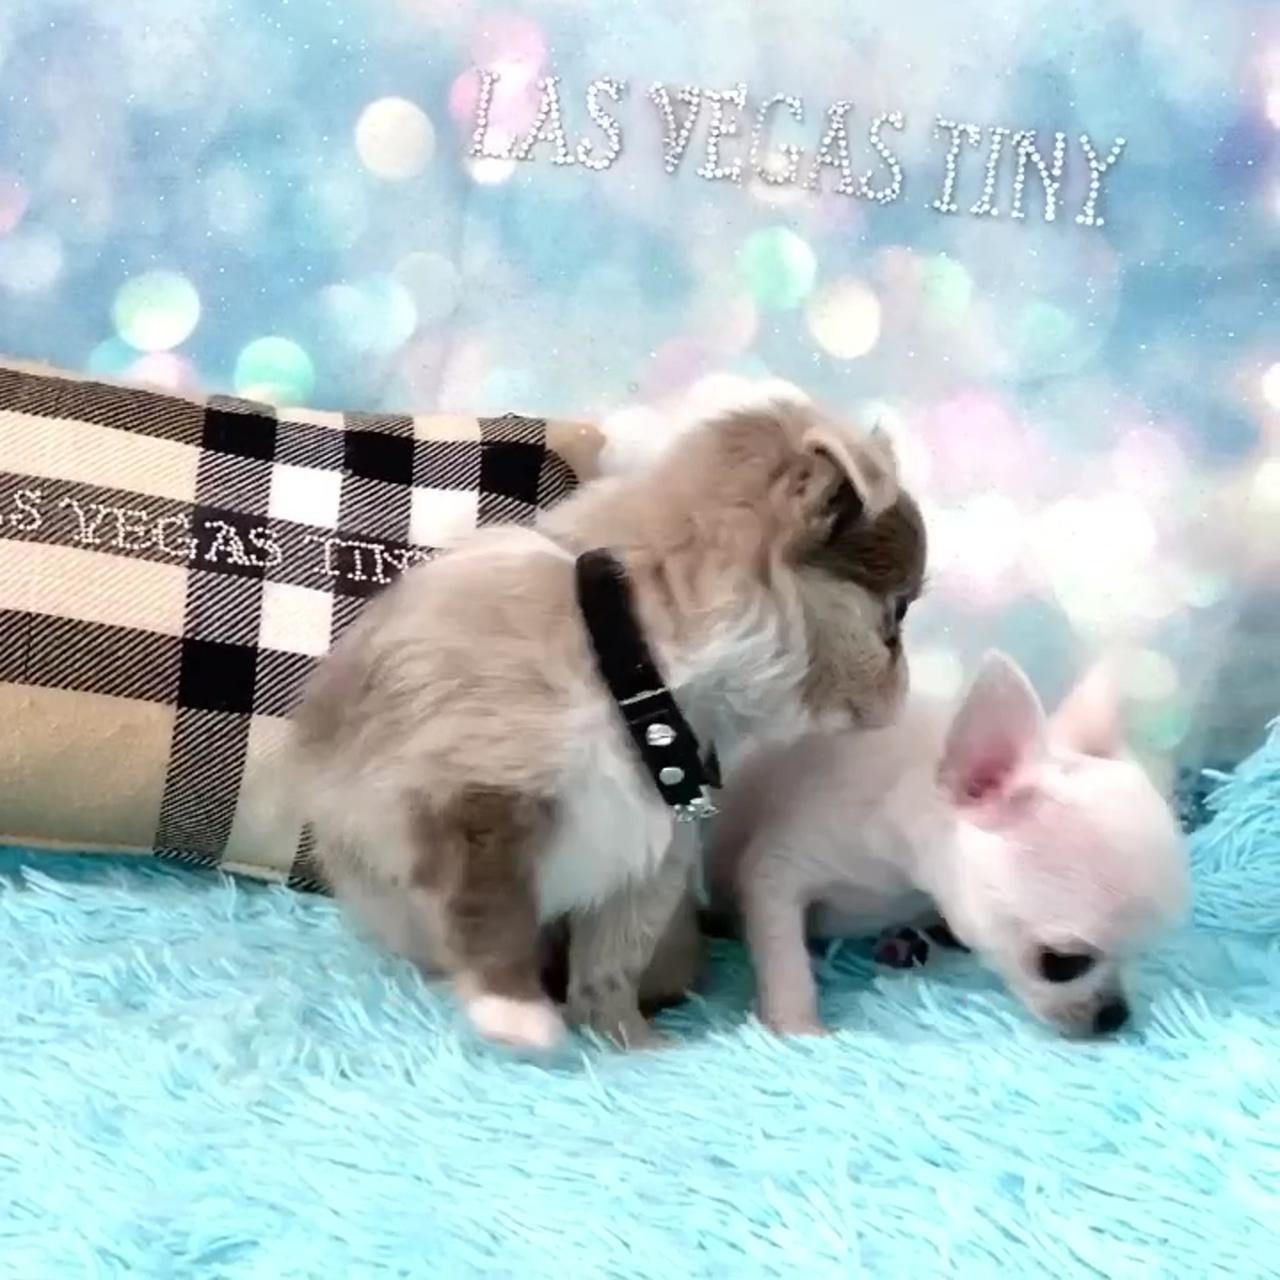 White and blue merle chihuahua, cute friends; little chanel dress, teacup chihuahua